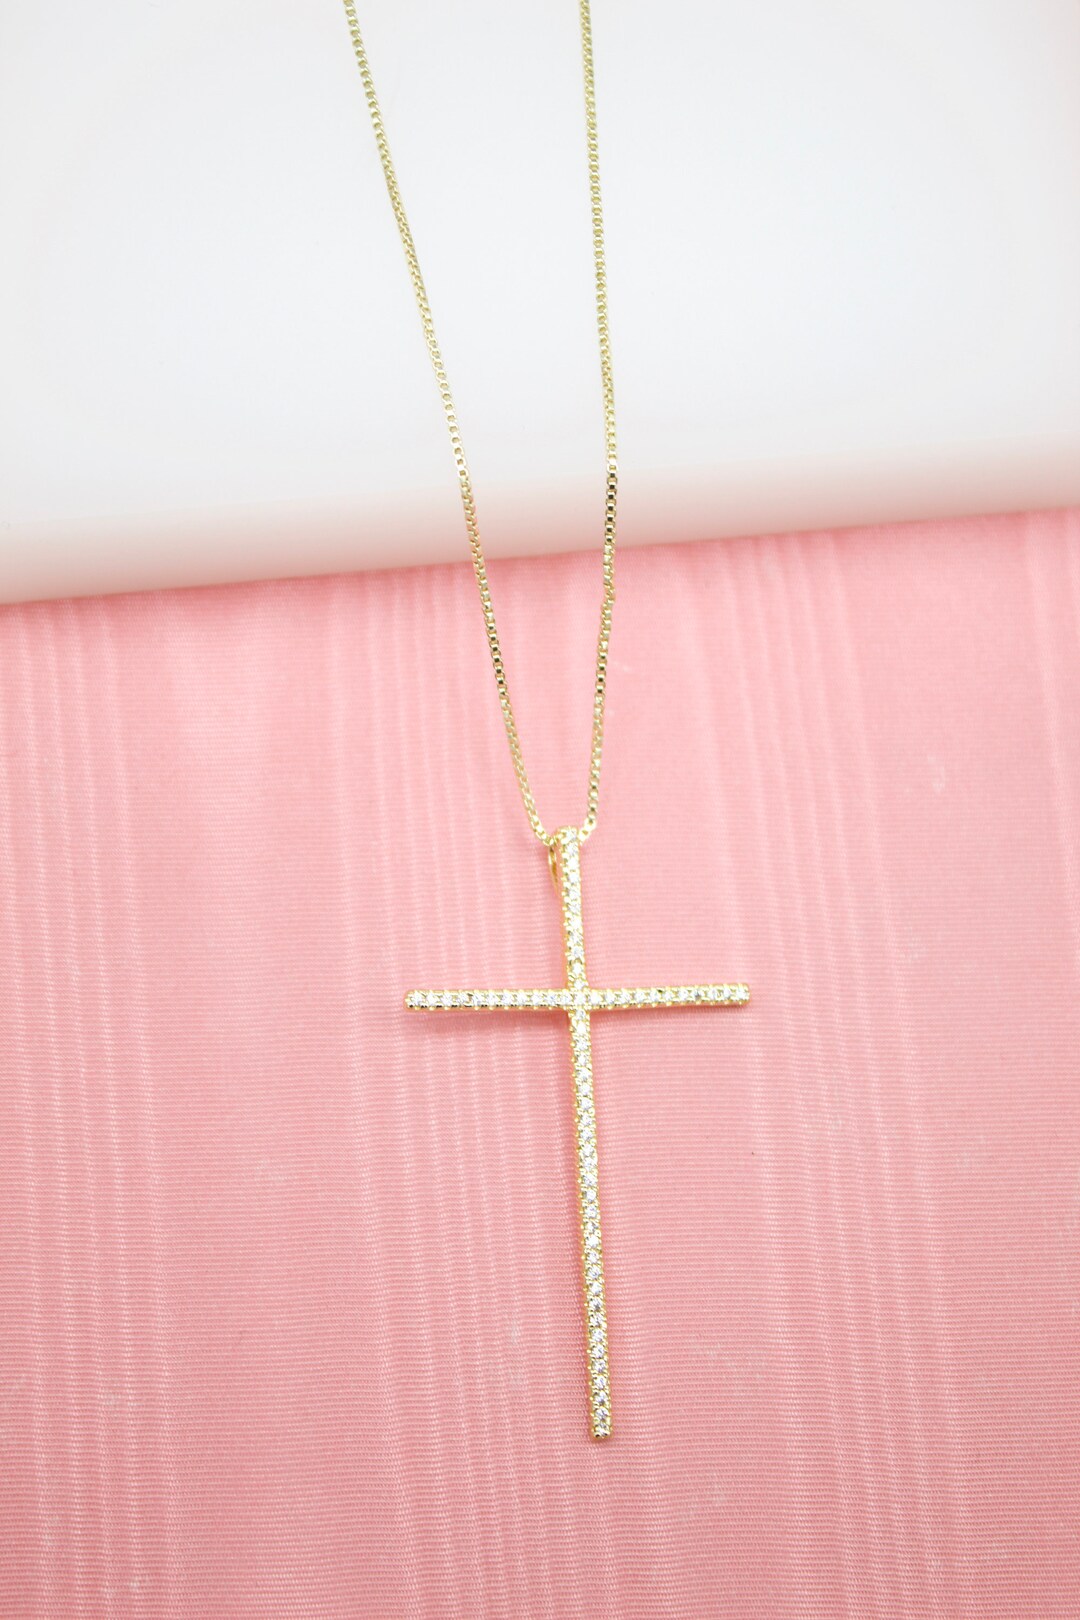 Golden Serenity Necklace Gold Cross Necklace Women Jewelry 